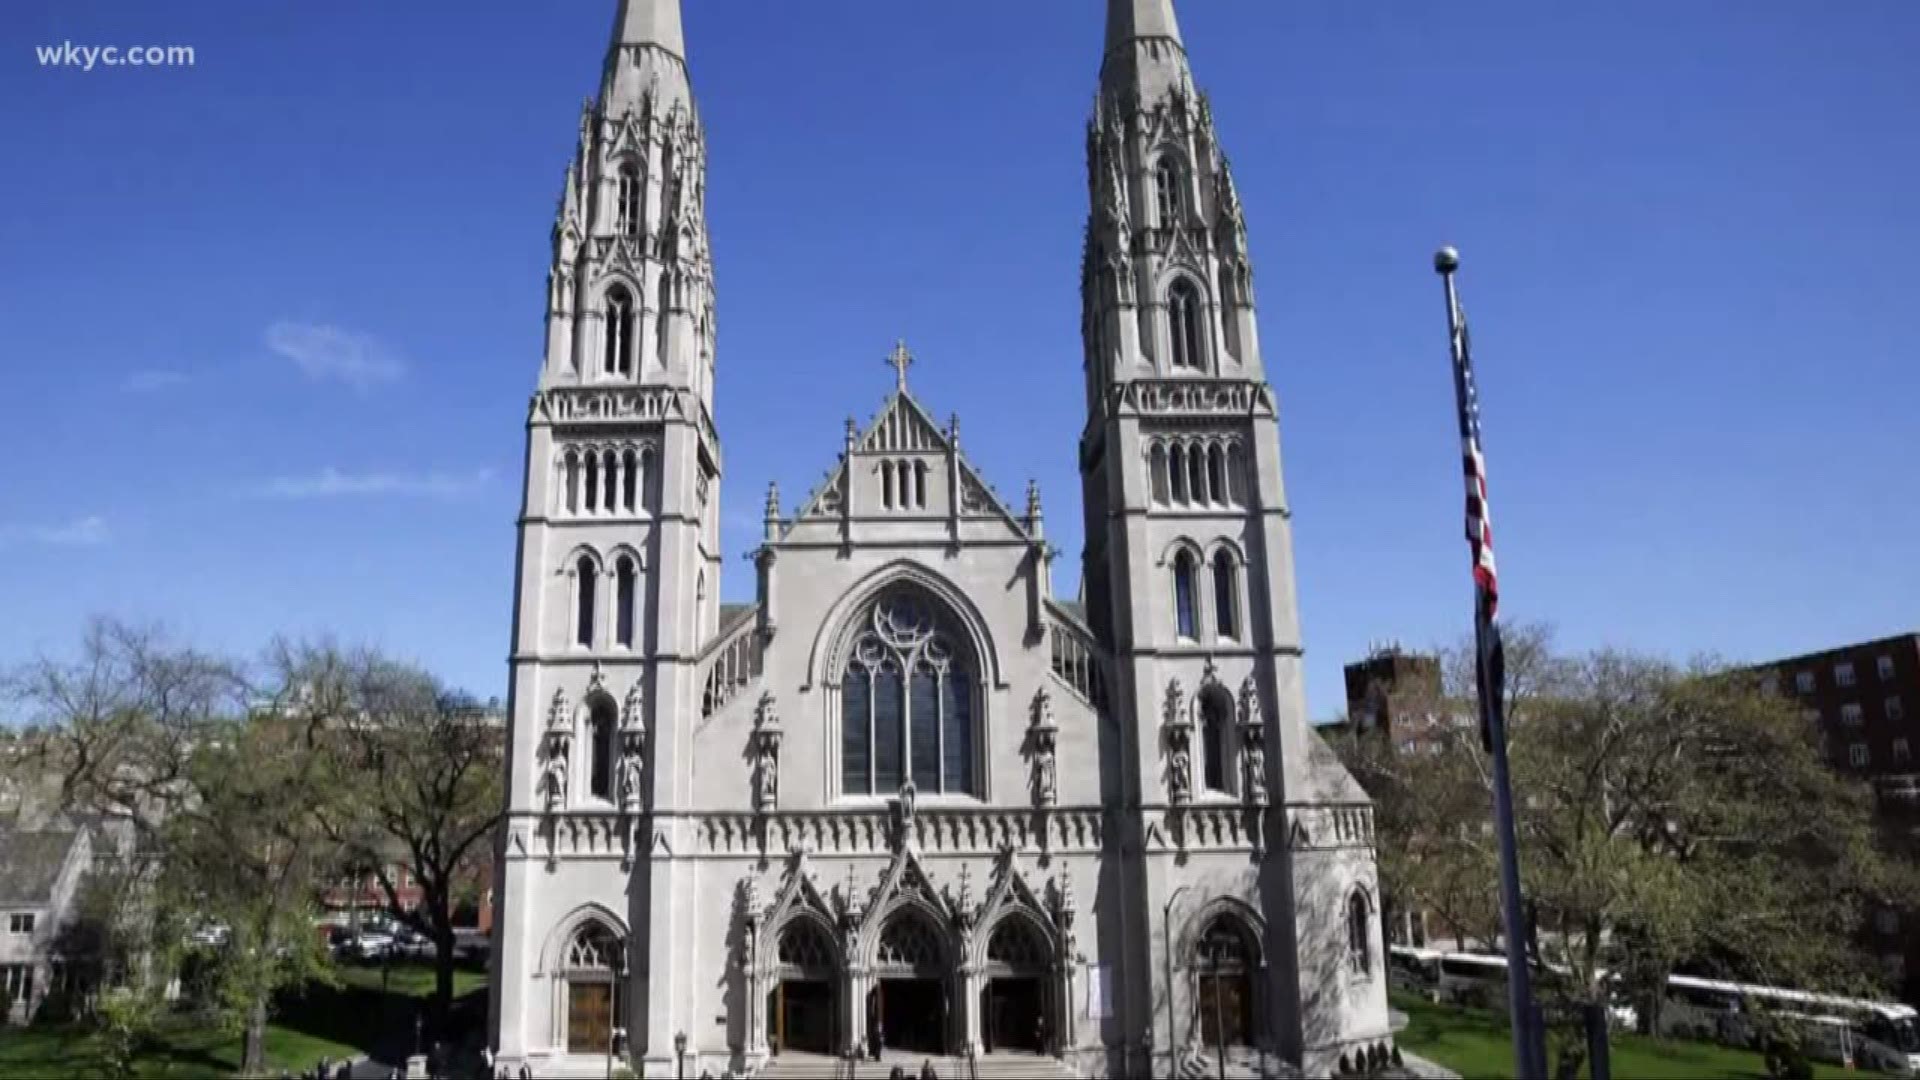 The Roman Catholic Diocese of Cleveland Friday released the names of 22 additional priests and other clergy members accused of sexual abuse against minors, adding another layer to a scandal that has brought significant shame and controversy to the Catholic Church around the world.